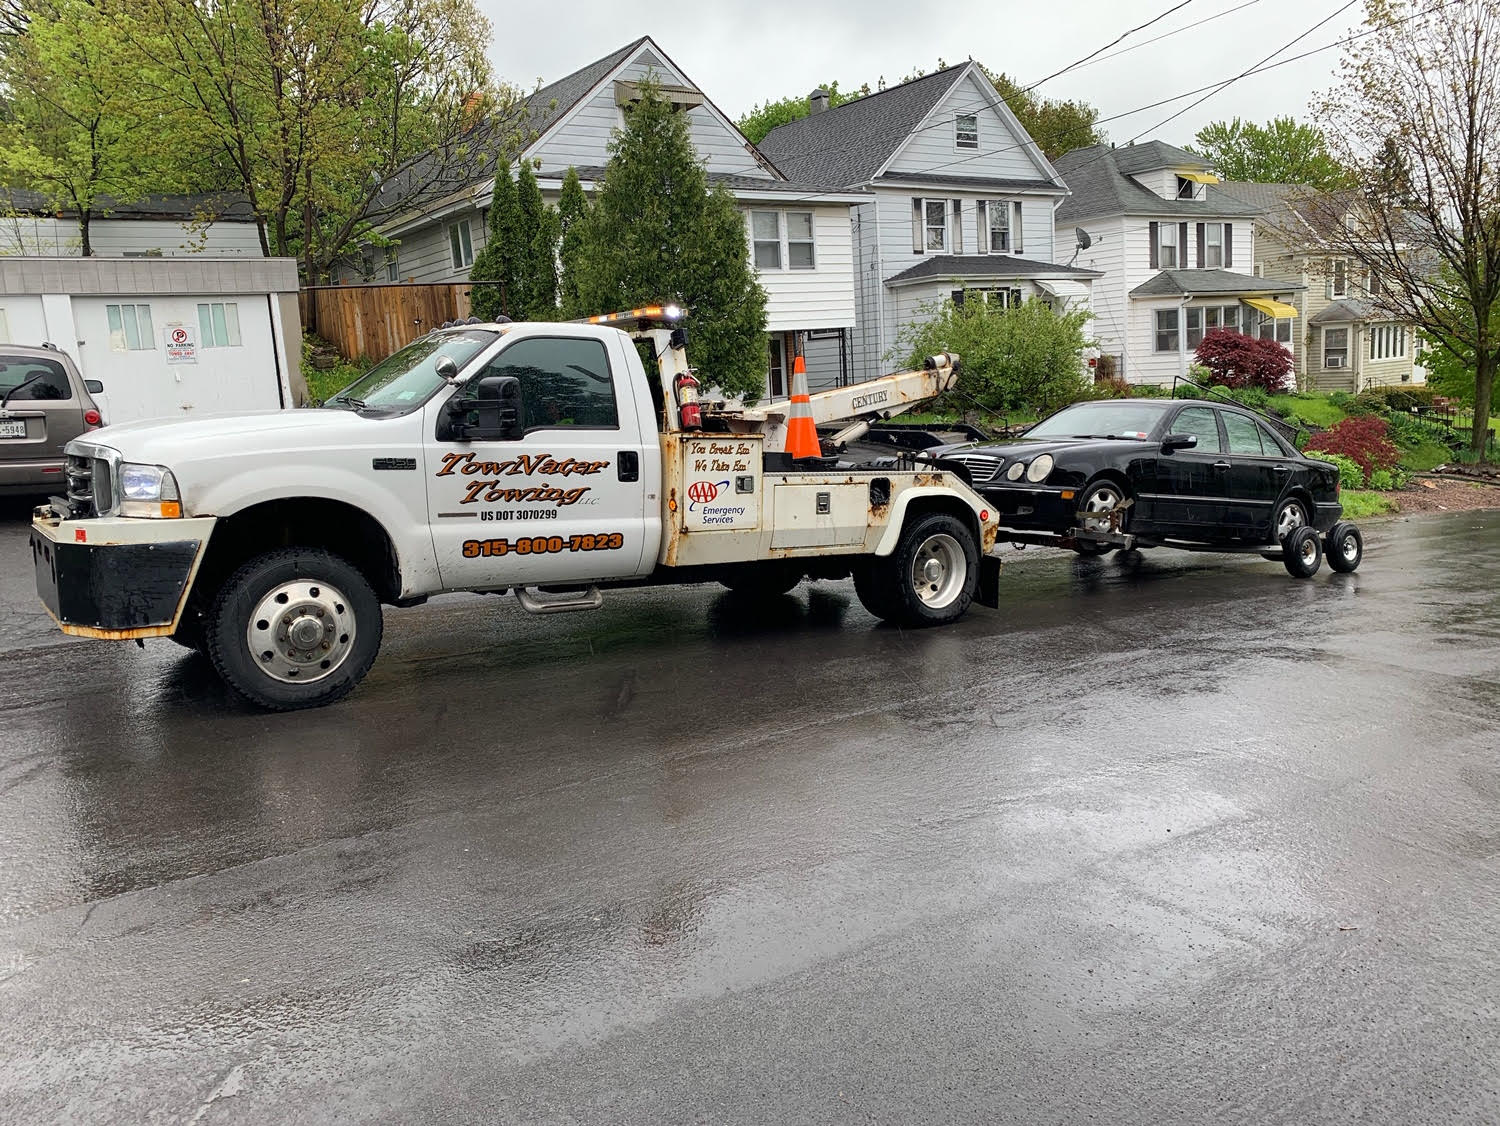 TowNater Towing LLC | (315) 800-7823 | LaFayette, NY | 24 Hour Towing Service | Light Duty Towing | Flatbed Towing | Classic Car Towing | Dually Towing | Exotic Towing | Winching & Extraction | Wrecker Towing | Accident Recovery | Equipment Transportation | Moving Forklifts | Scissor Lifts Movers | Boom Lifts Movers | Bull Dozers Movers | Excavators Movers | Compressors Movers | Exotic Car & Sport Car Towing | Long Distance Towing | Auto Transport | Lockouts | Fuel Delivery | Jump Starts | Roadside Assistance | Motorcycle Towing | Tire Service | Private Property Impound (Non-Consensual Towing)